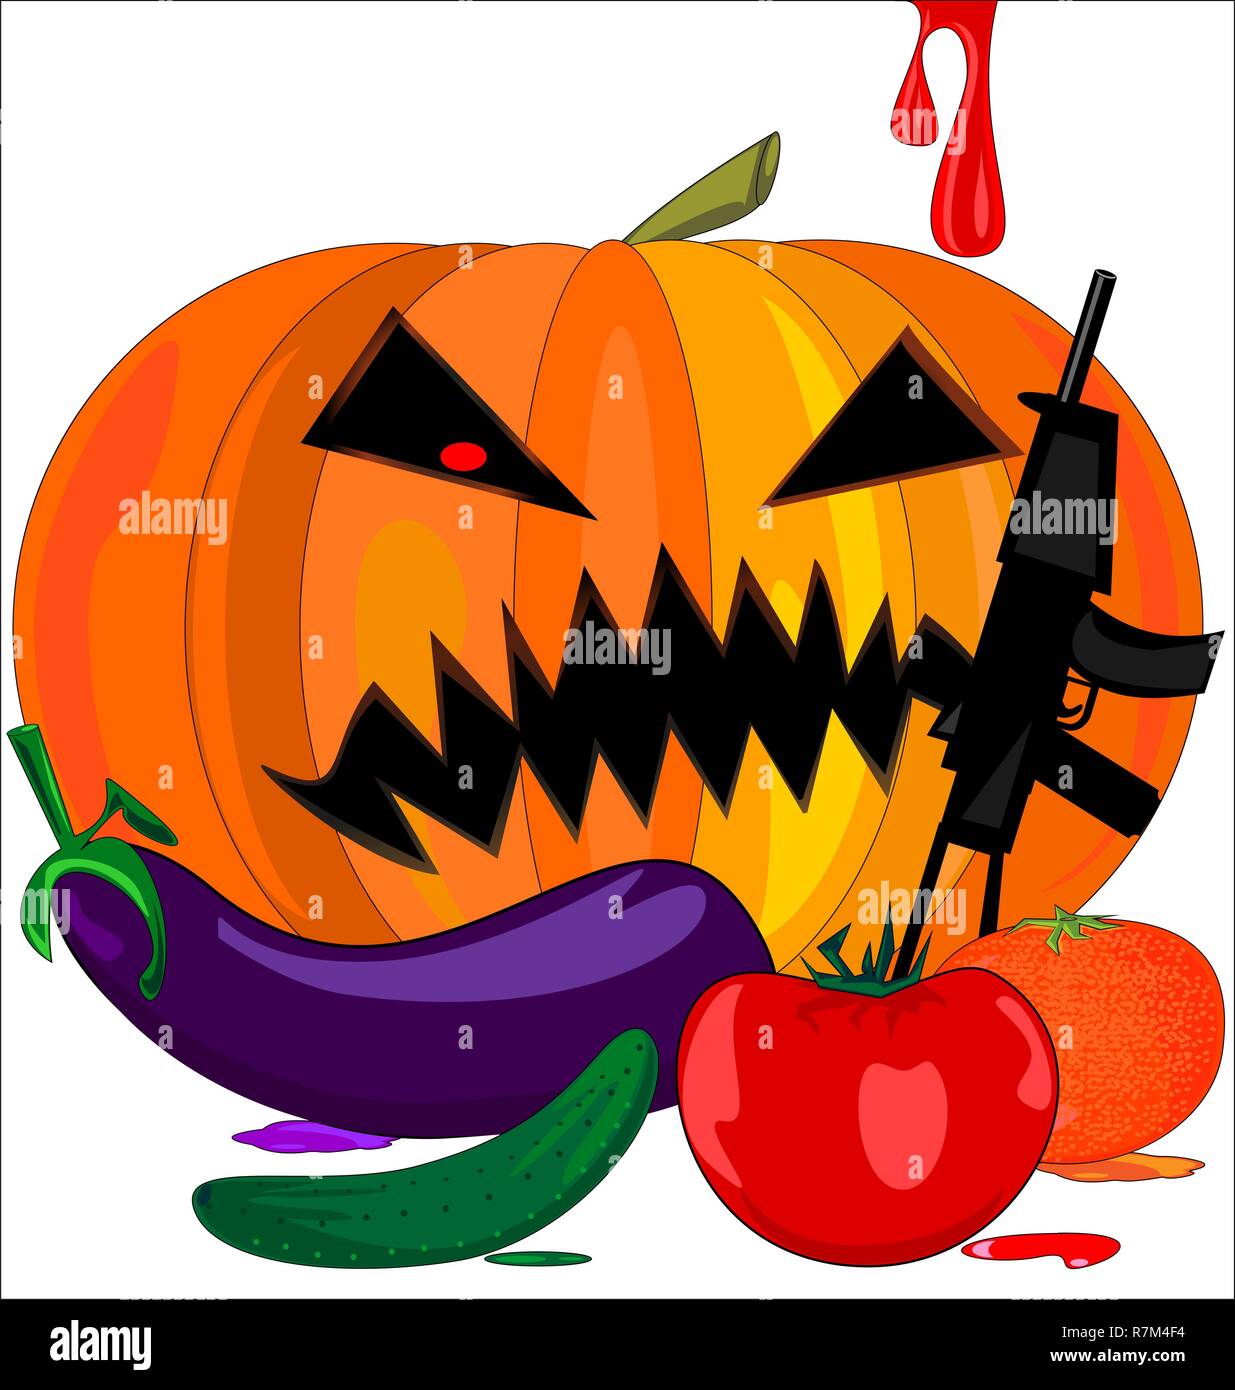 abstract image of evil Halloween pumpkin and vegetables Stock Vector